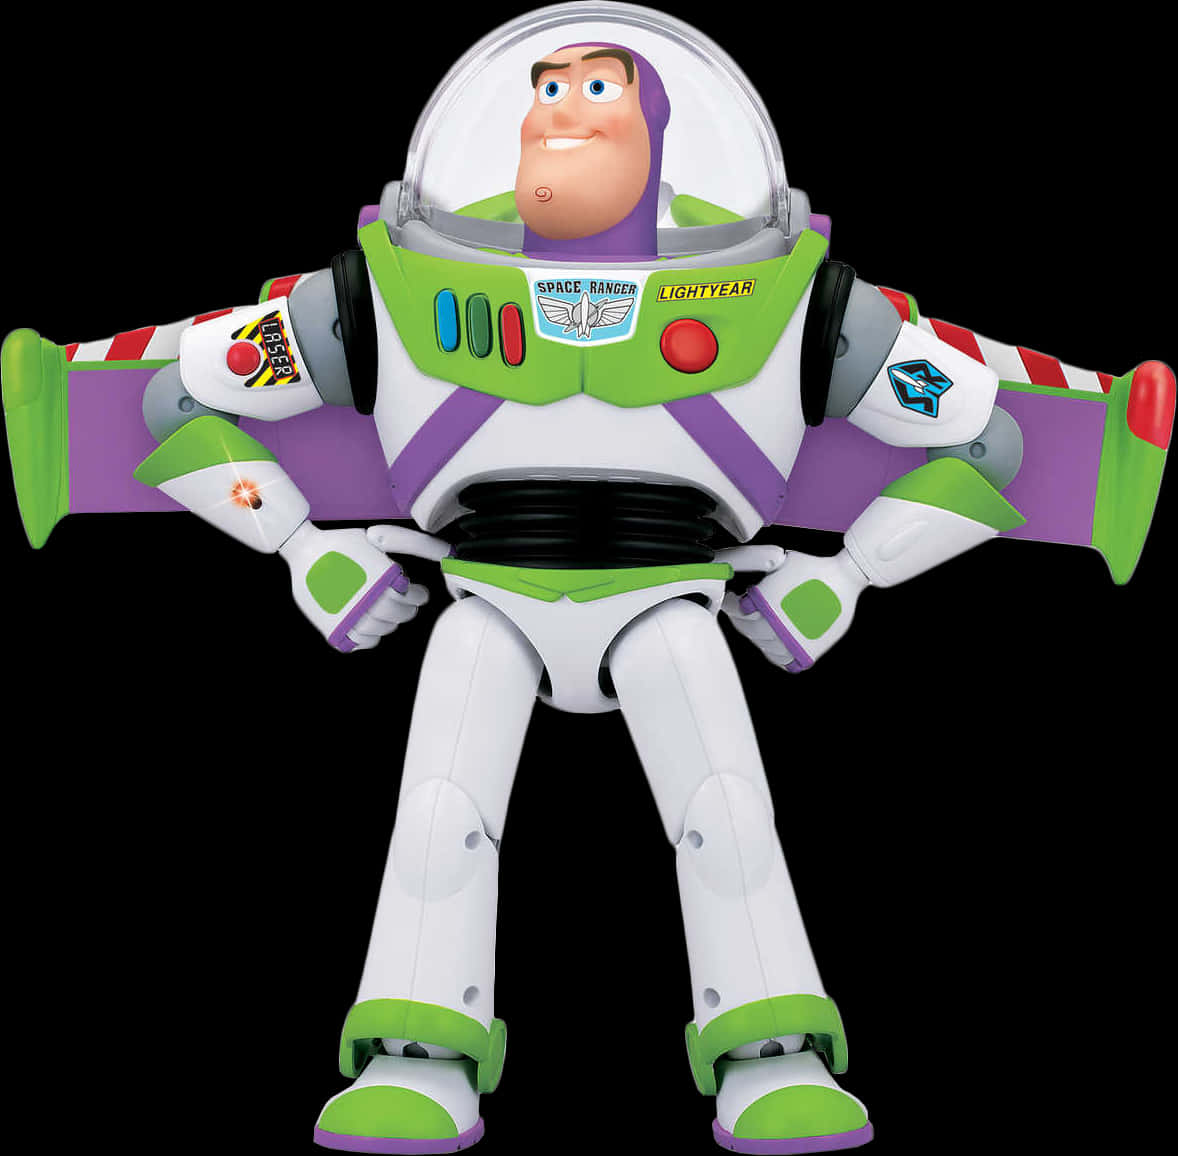 Buzz Lightyear Toy Pose PNG image